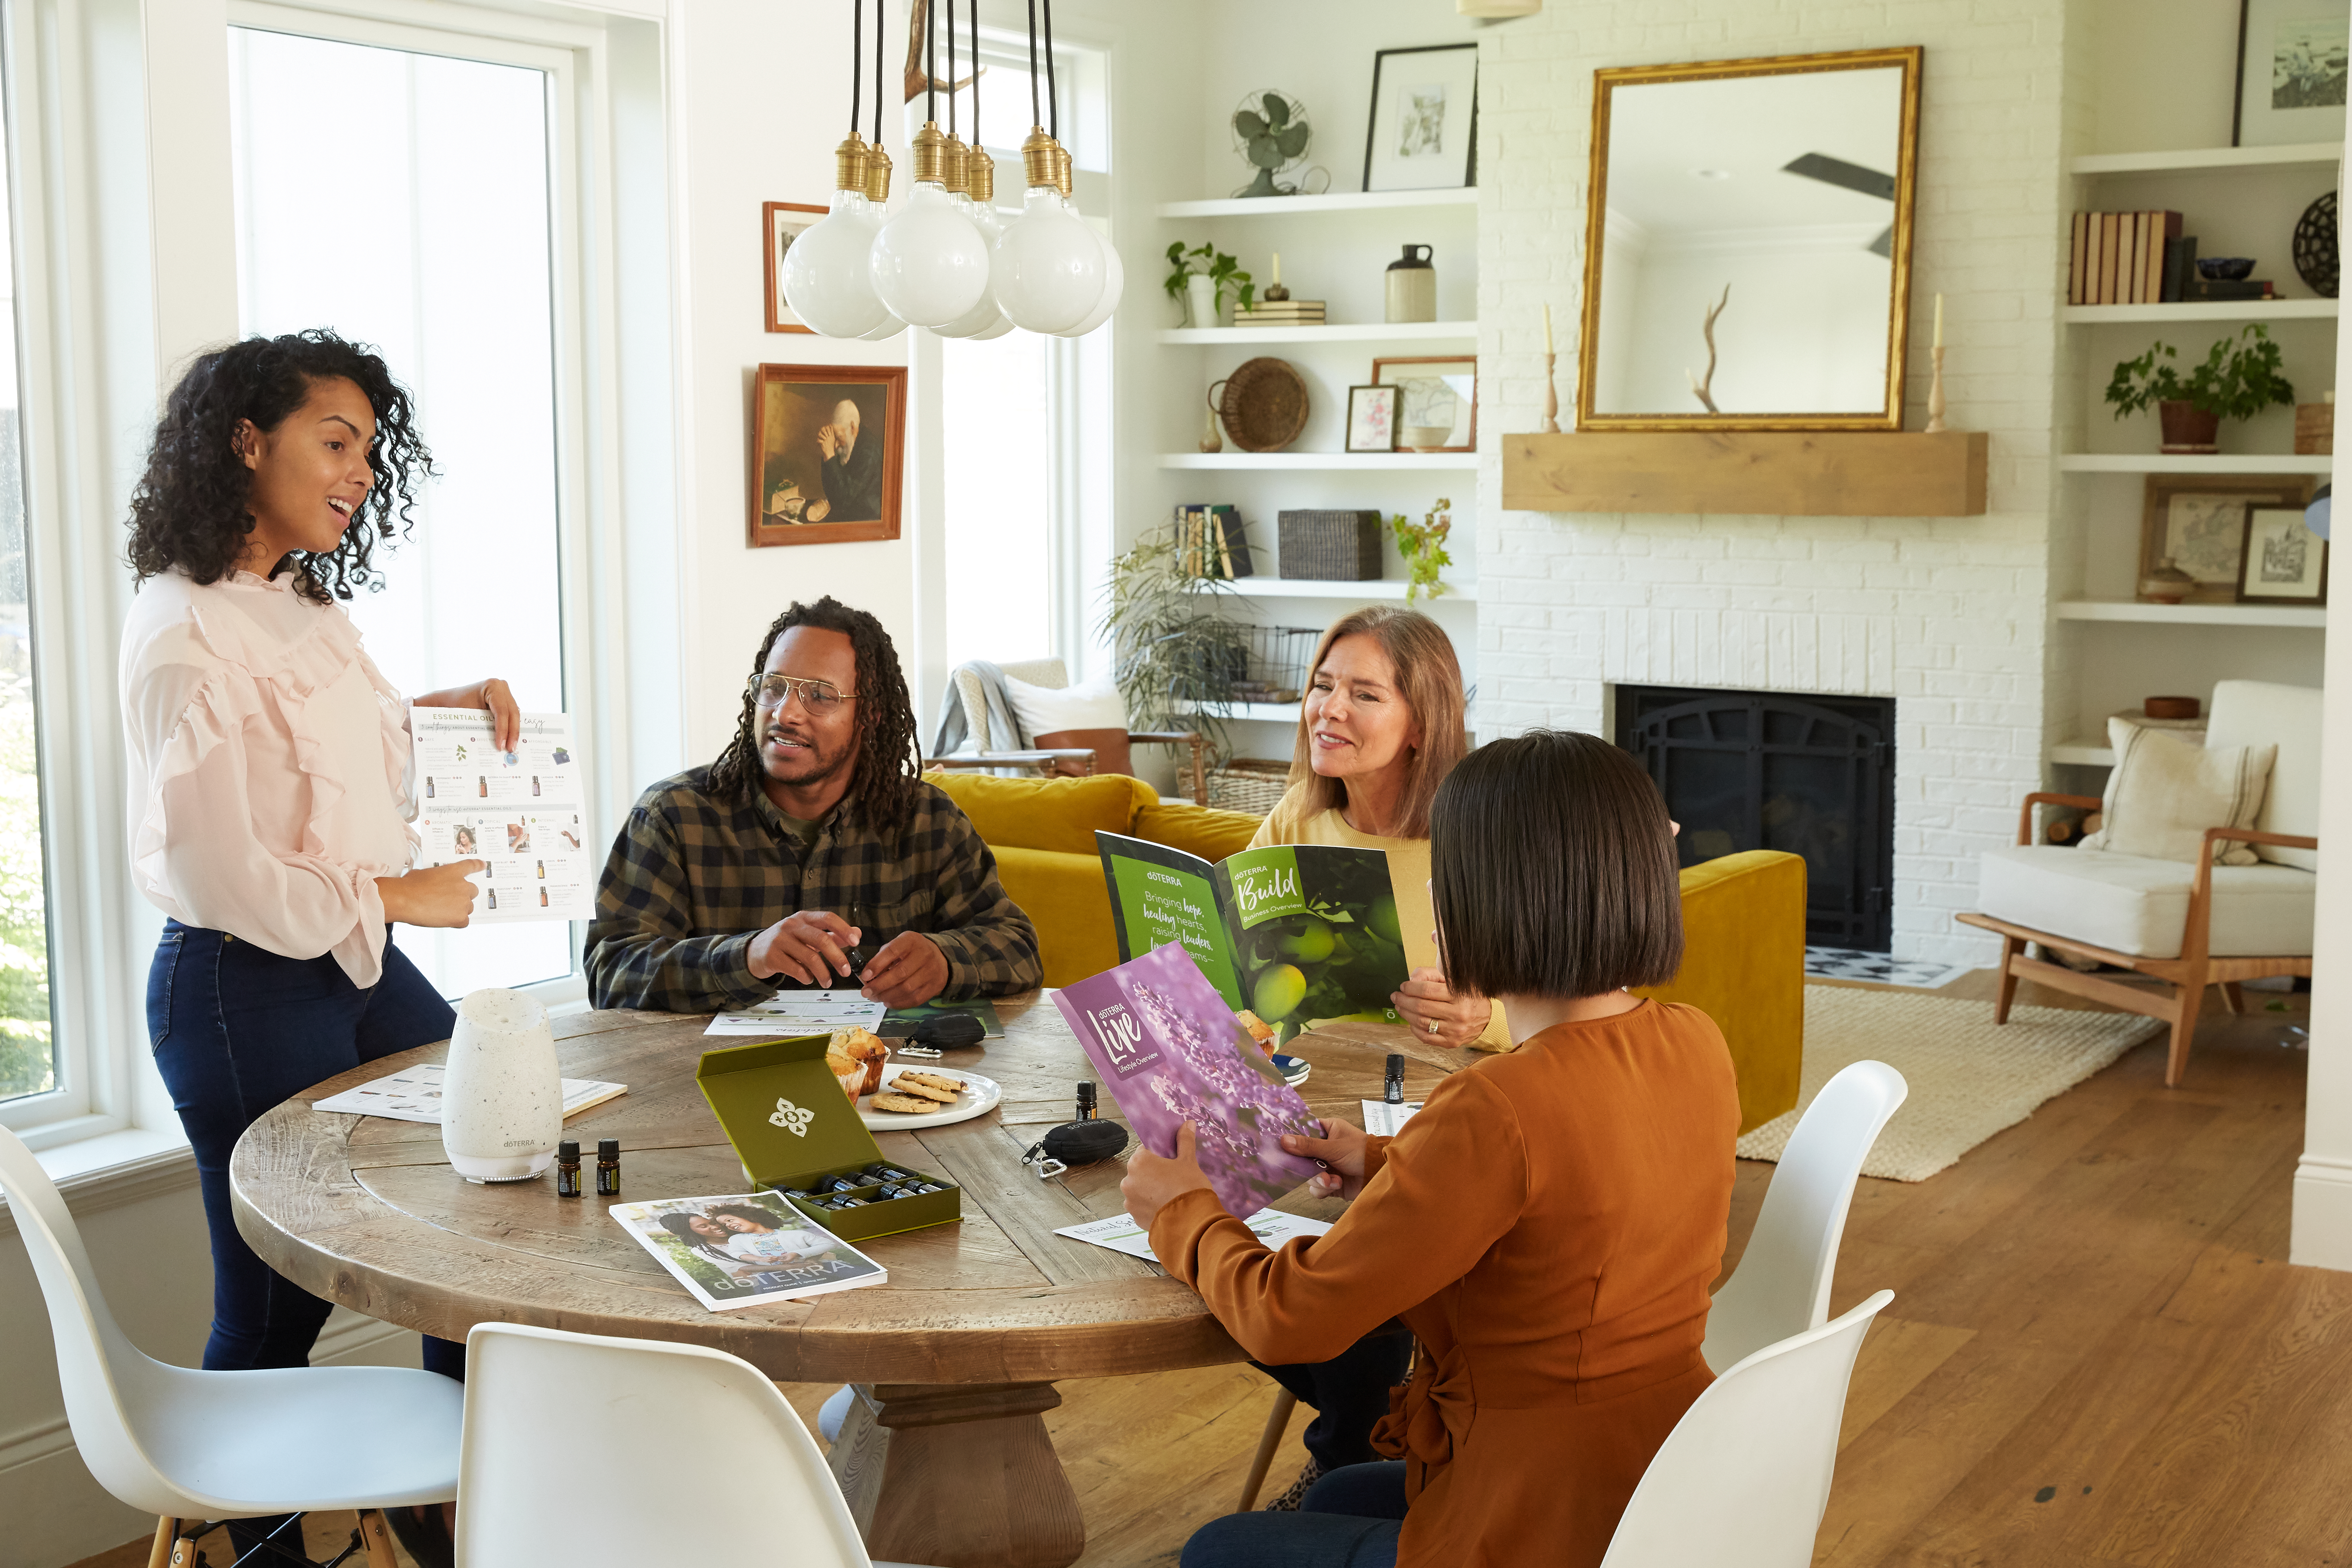 A group of people sitting around a table in a living room